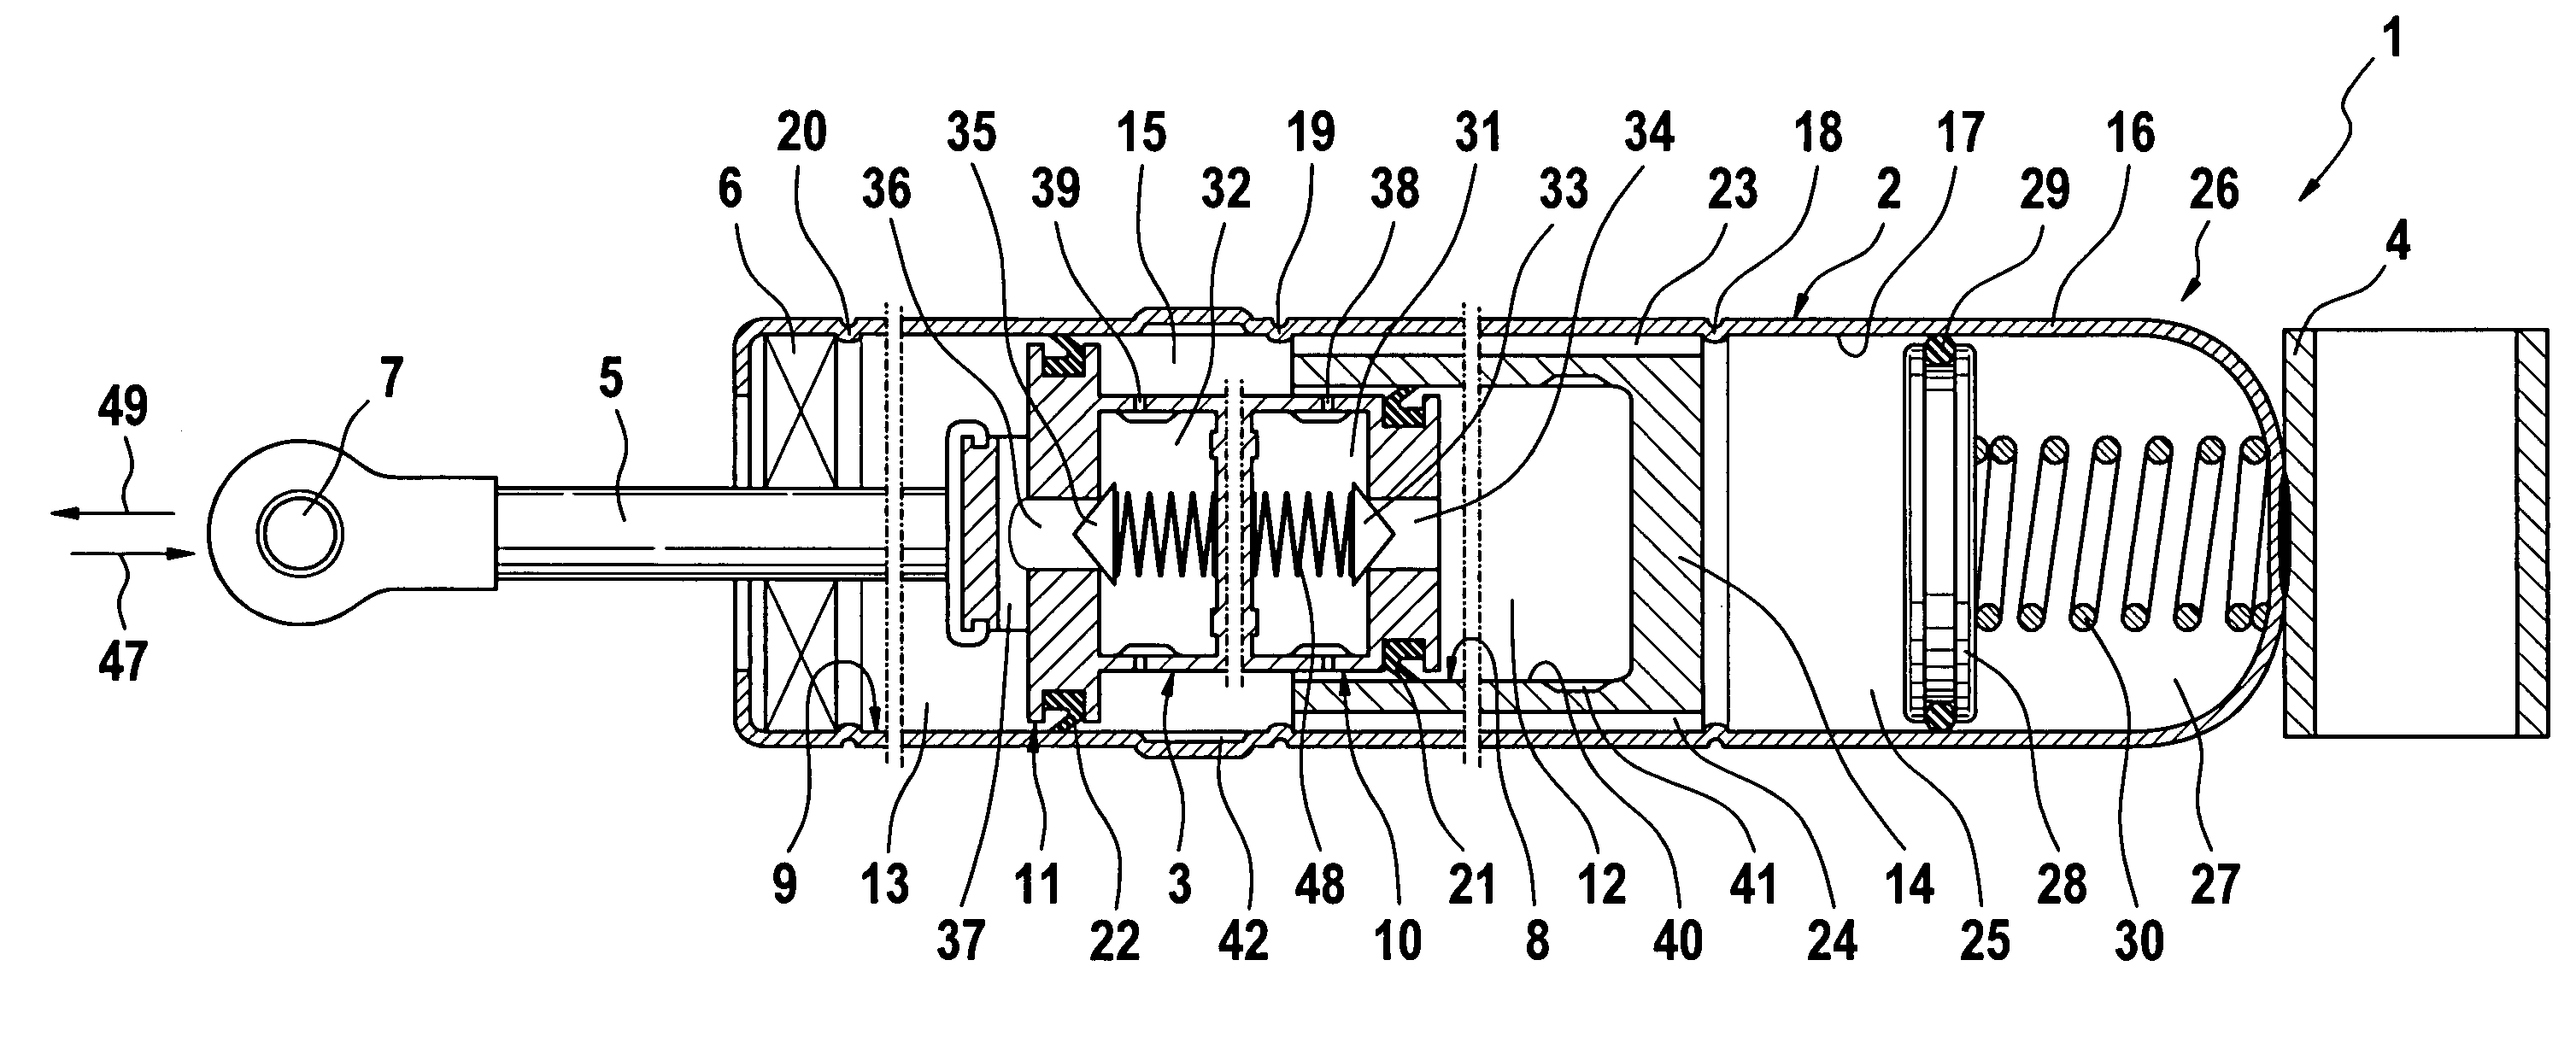 Continuously lockable adjustment device